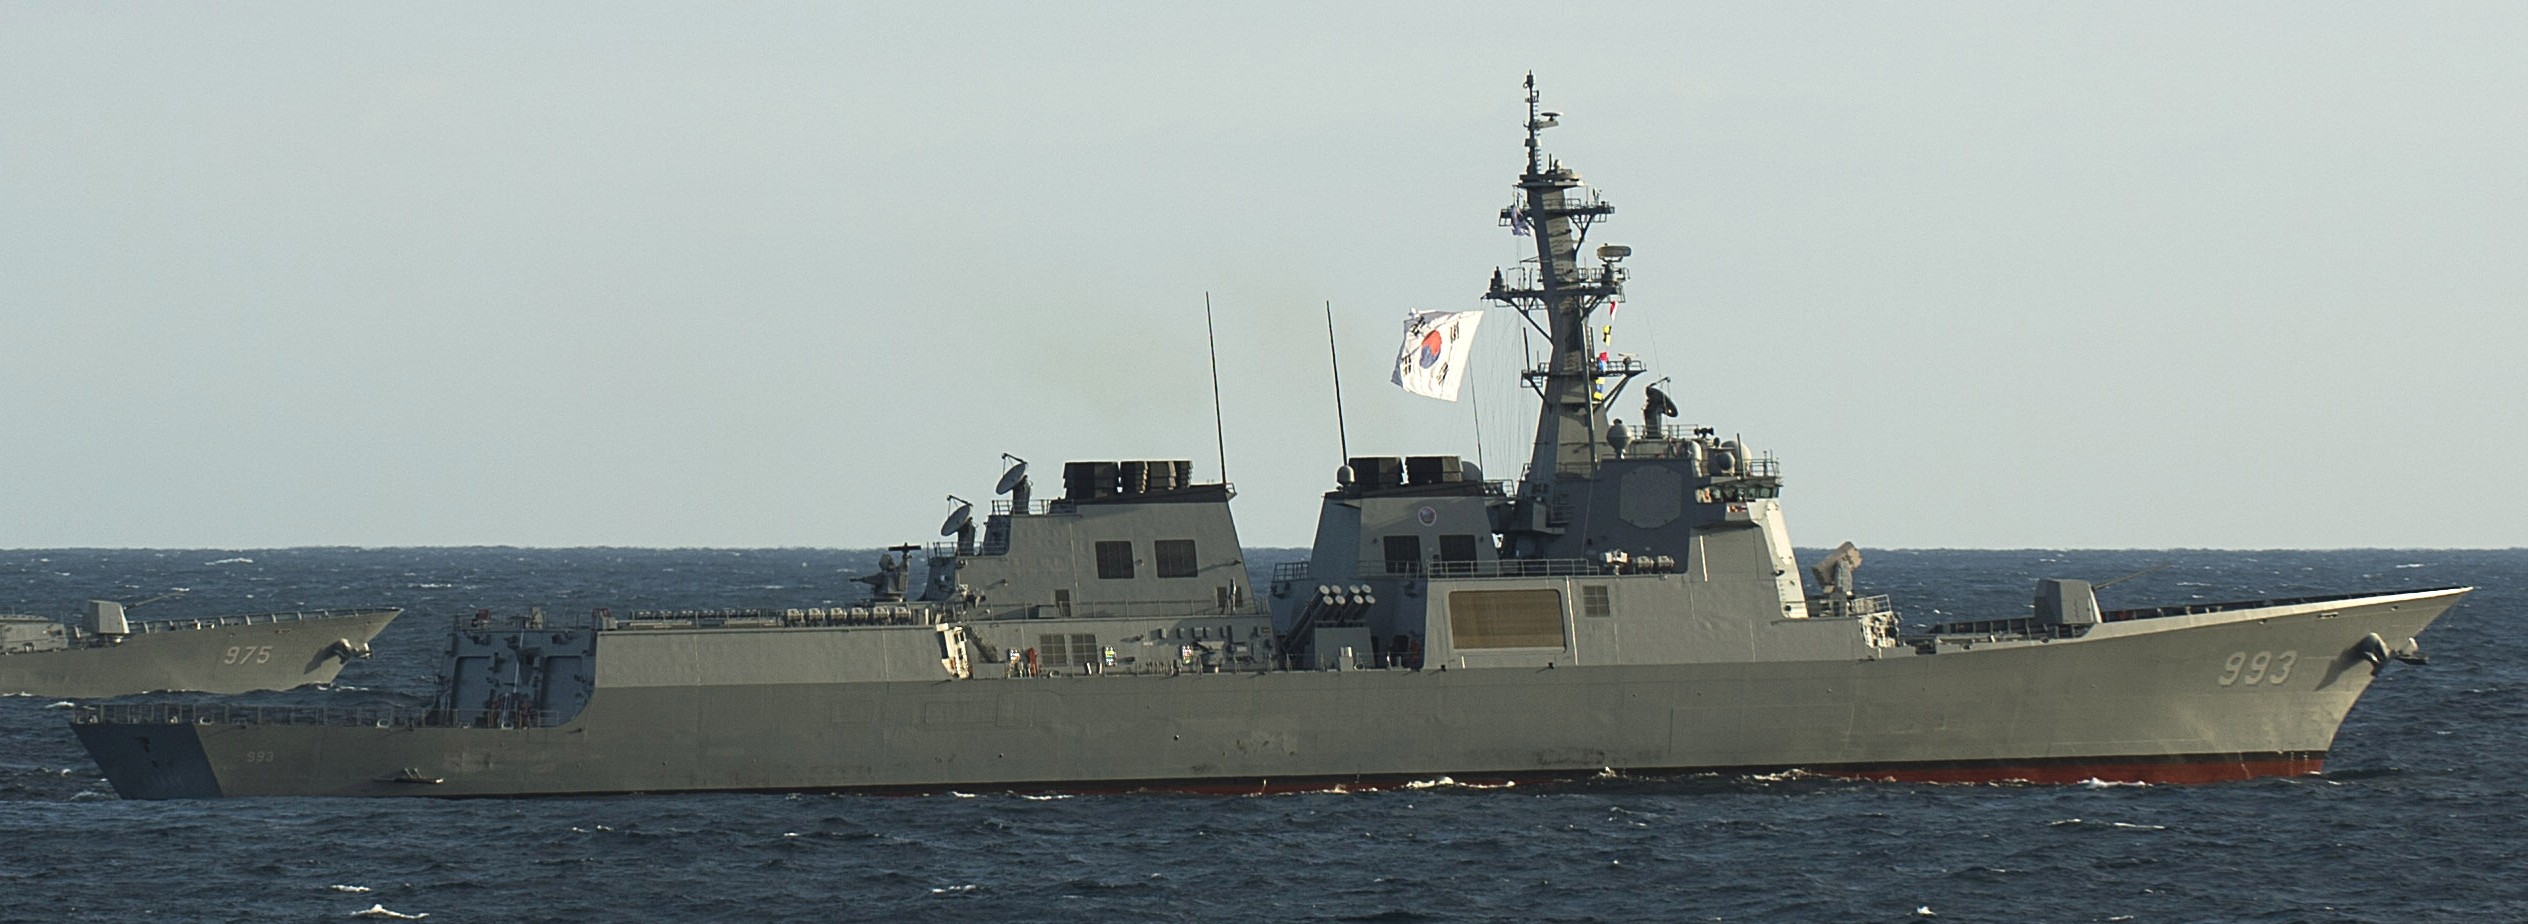 ddg-993 roks seoae ryu seong-ryong sejong the great class guided missile destroyer aegis republic of korea navy rokn 10